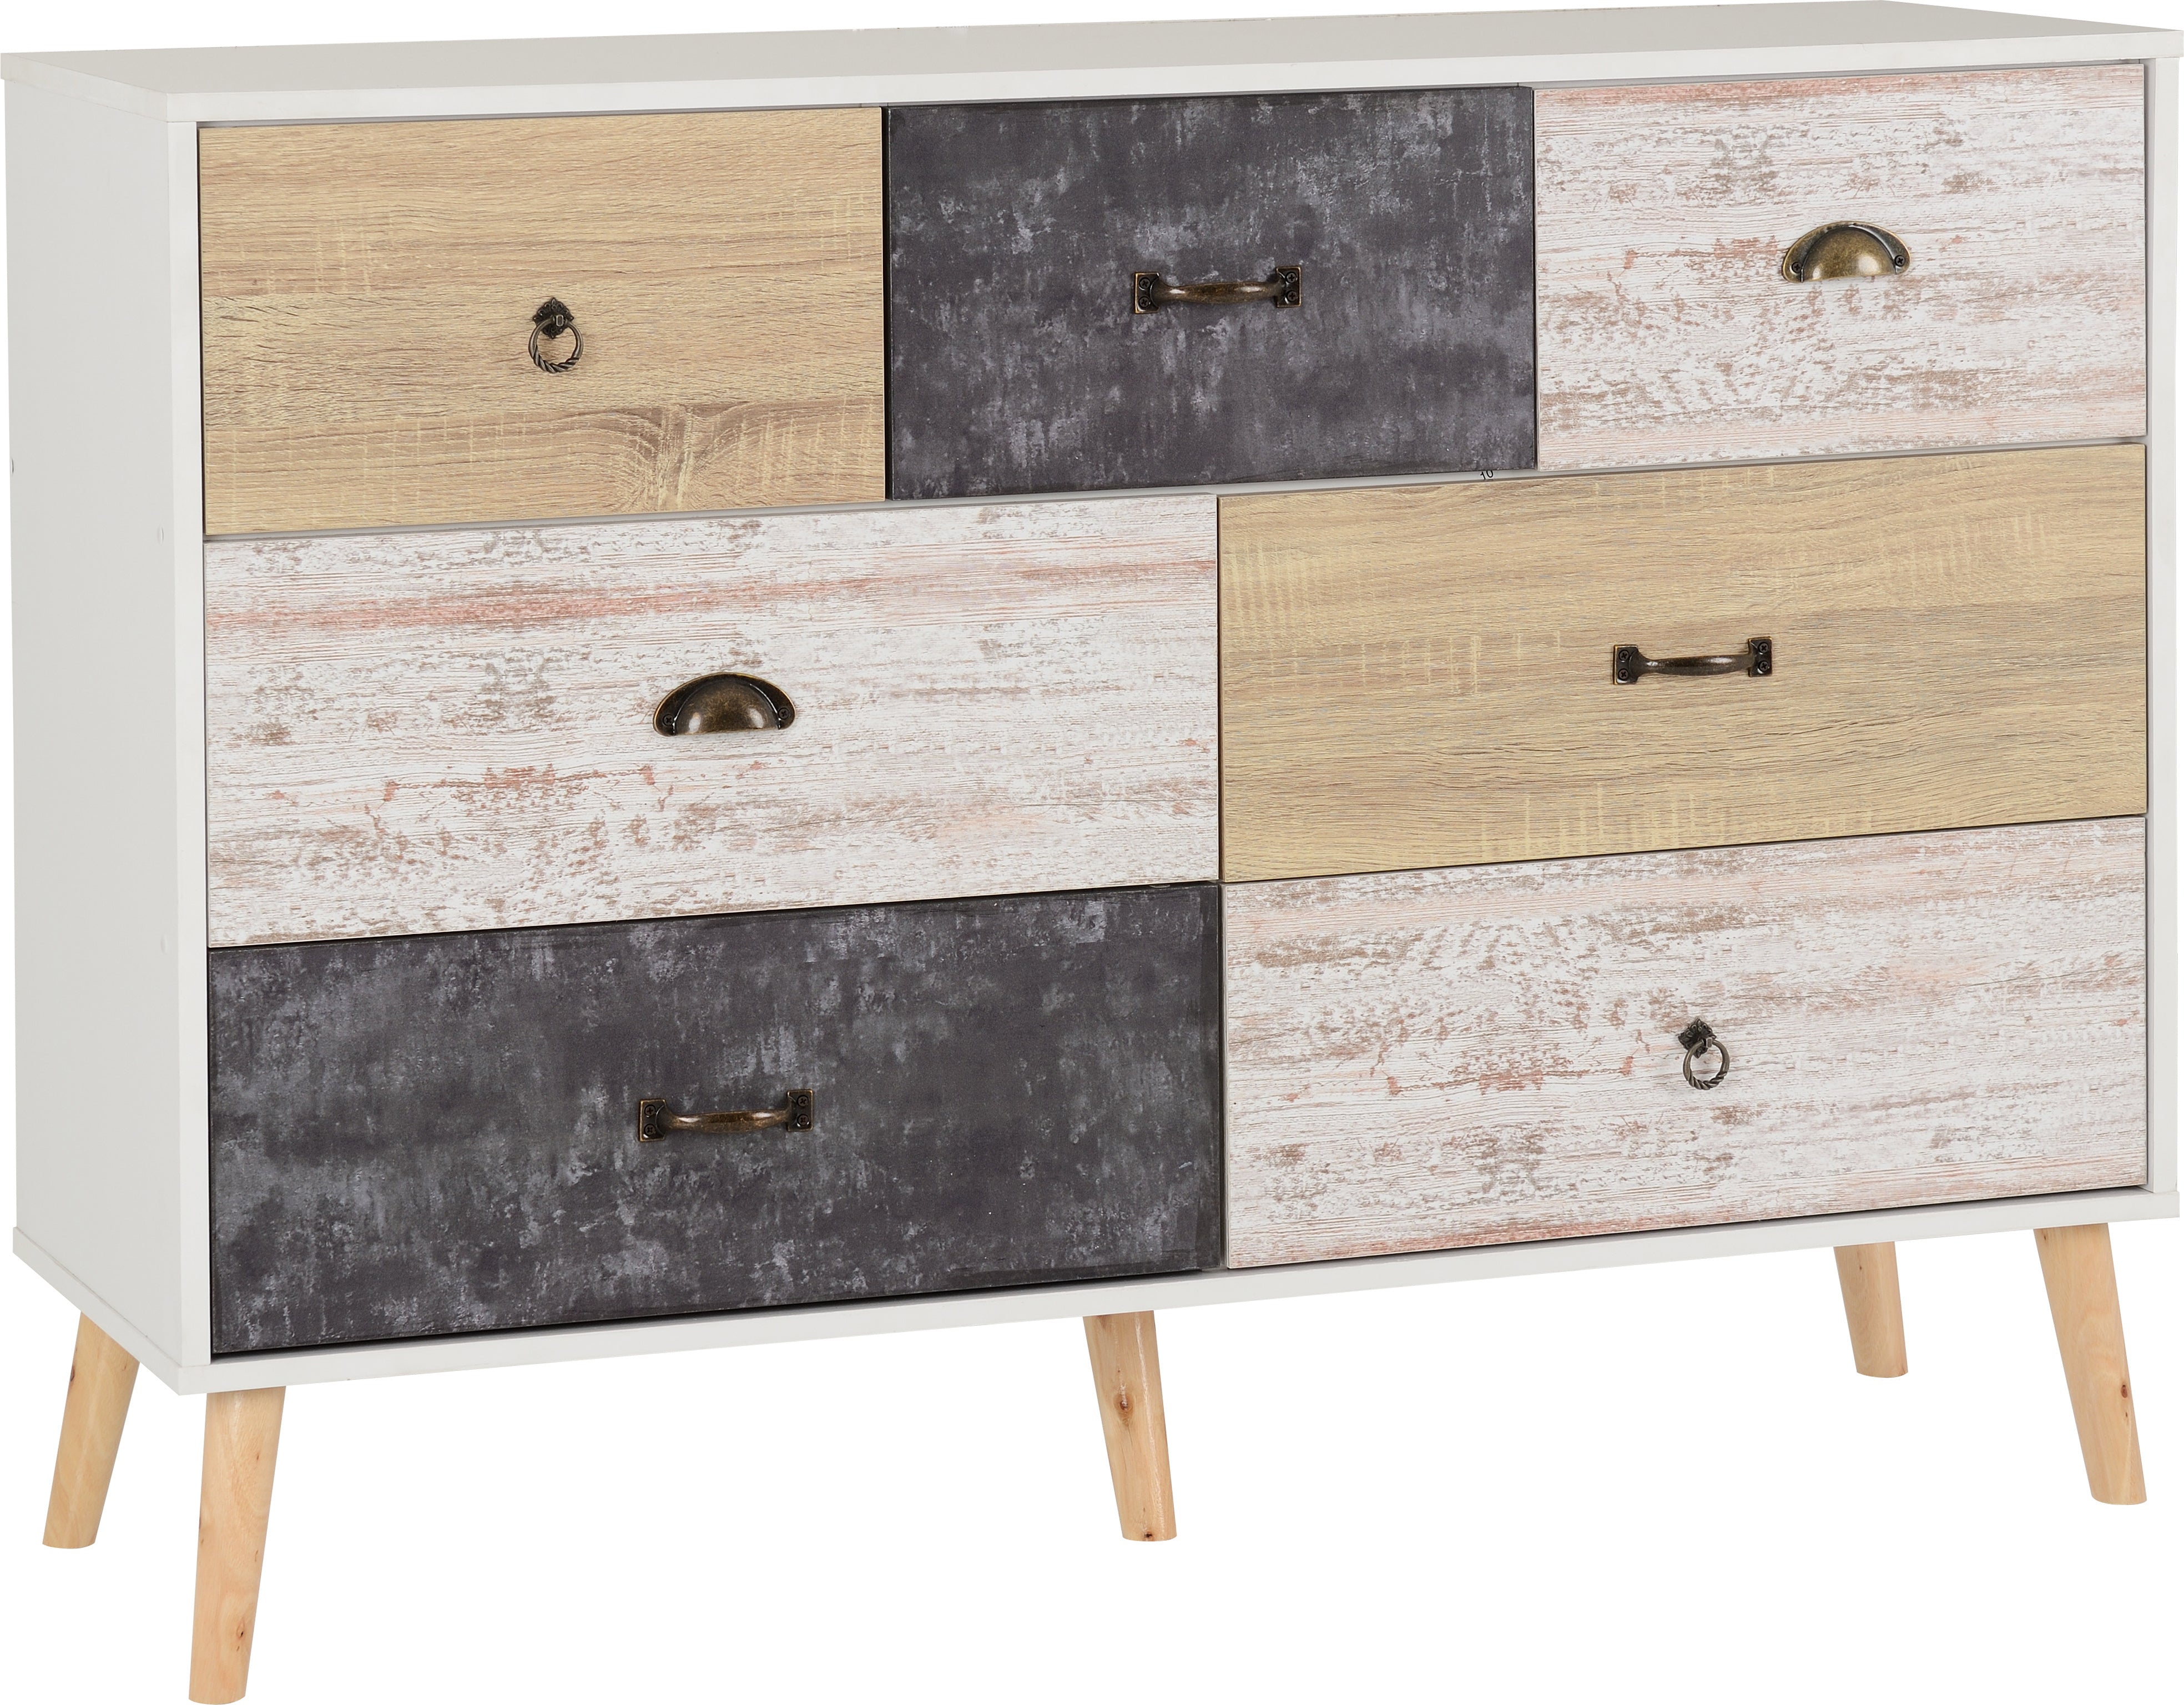 Nordic Merchant Chest White/Distressed Effect